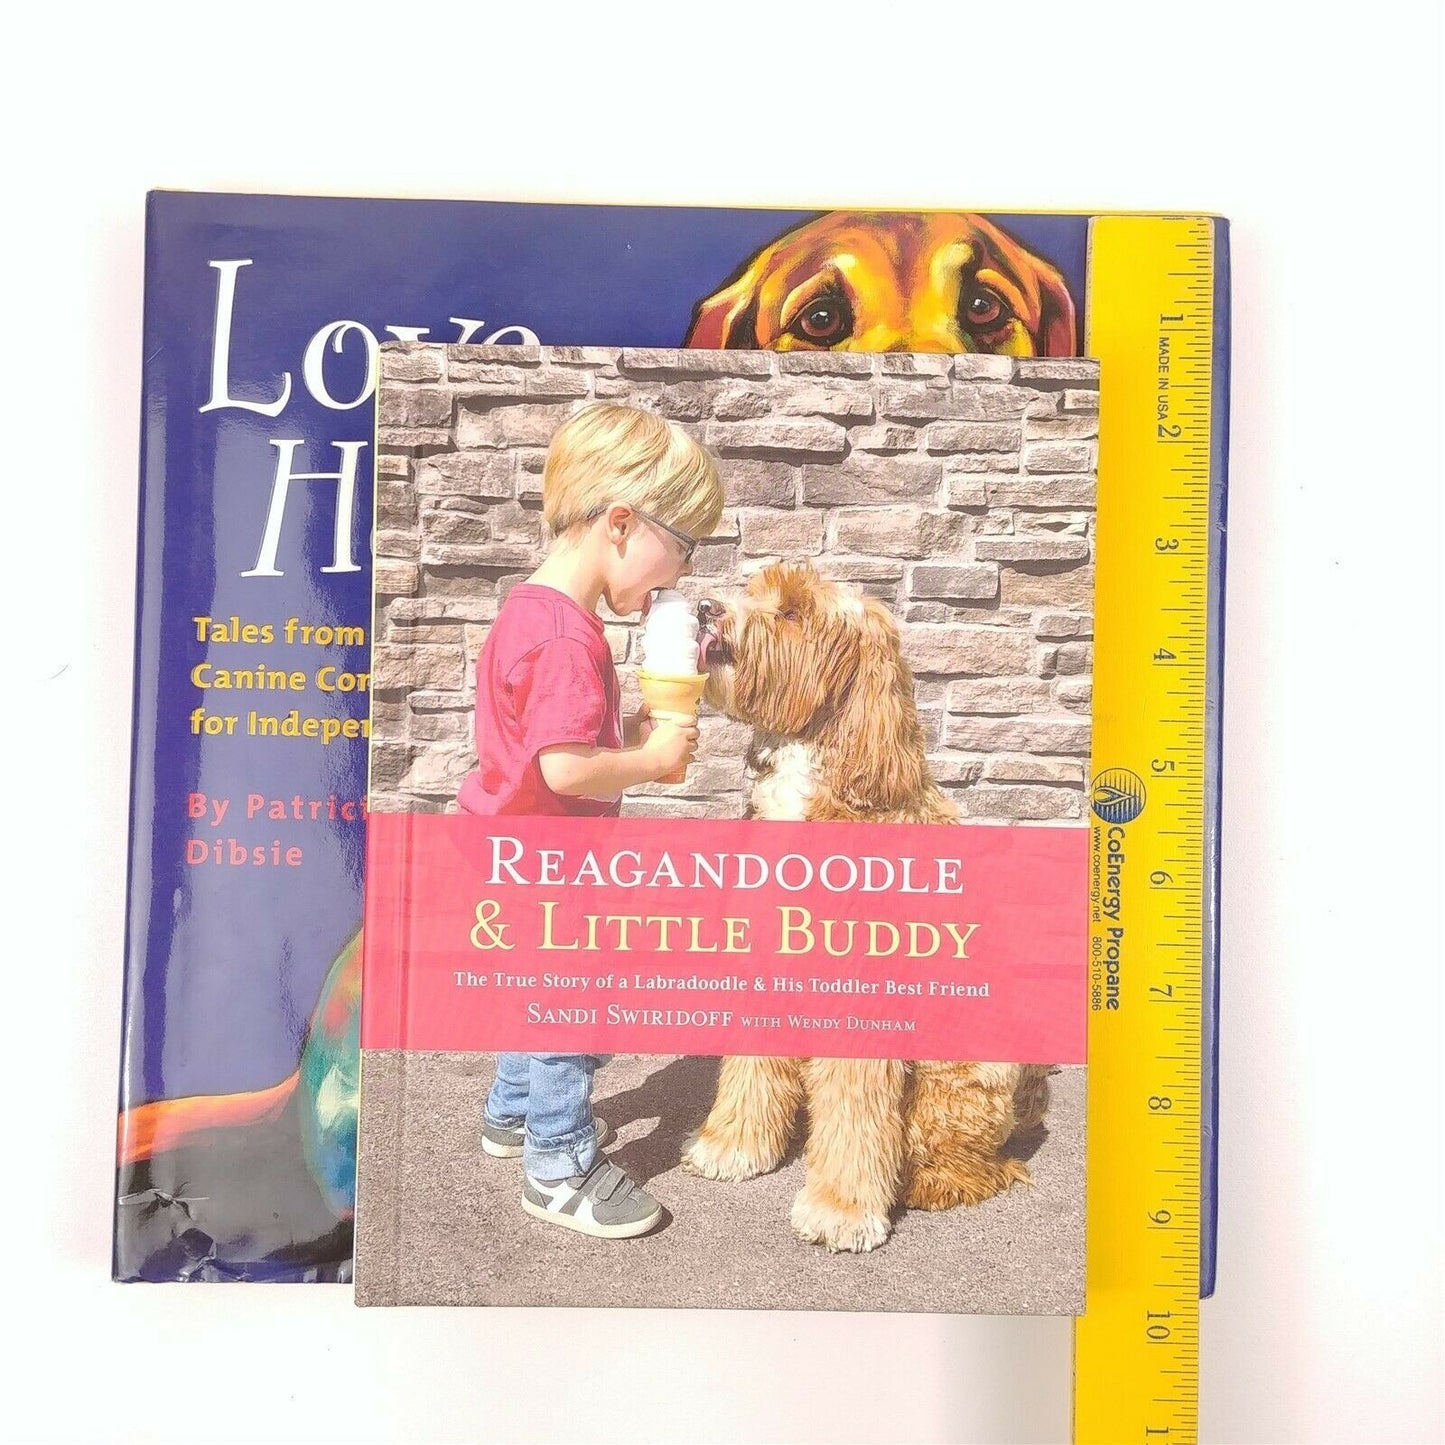 Book Collection of Animal Love, Behavior, Companionship Tales Hard & Paperback